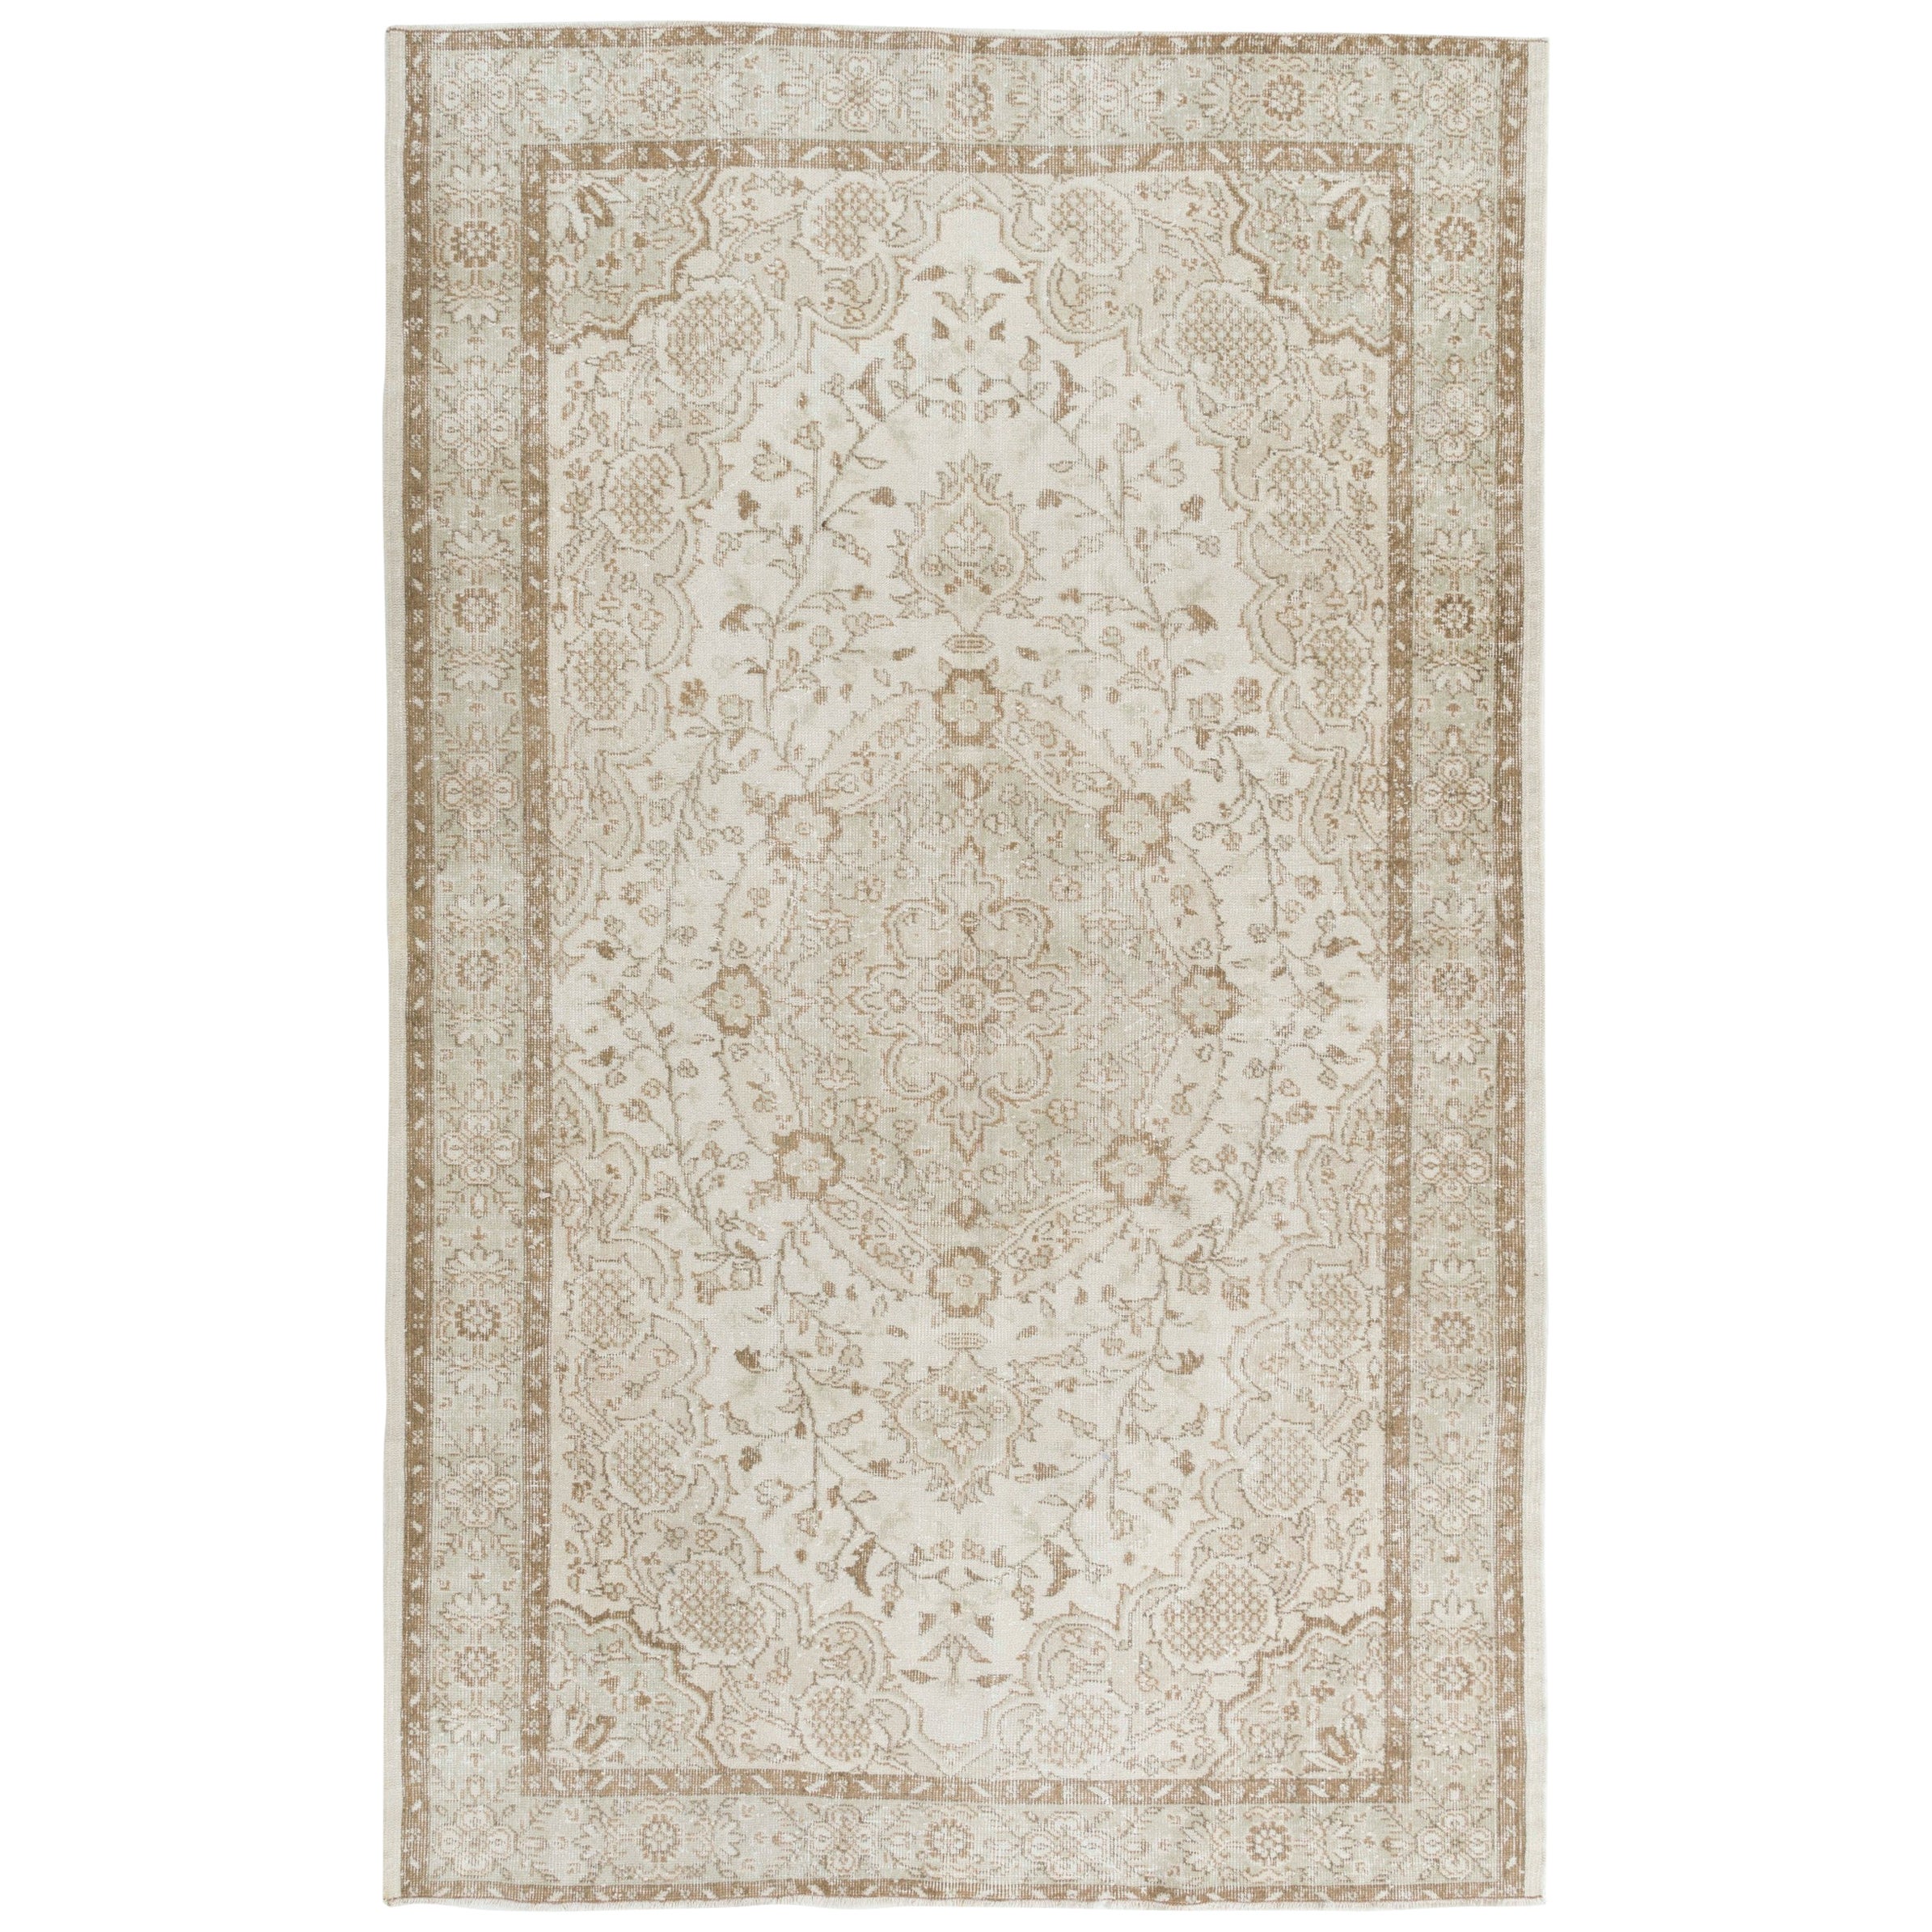 6.2x9.7 Ft Vintage Hand-Knotted Turkish Oushak Wool Area Rug in Neutral Colors For Sale